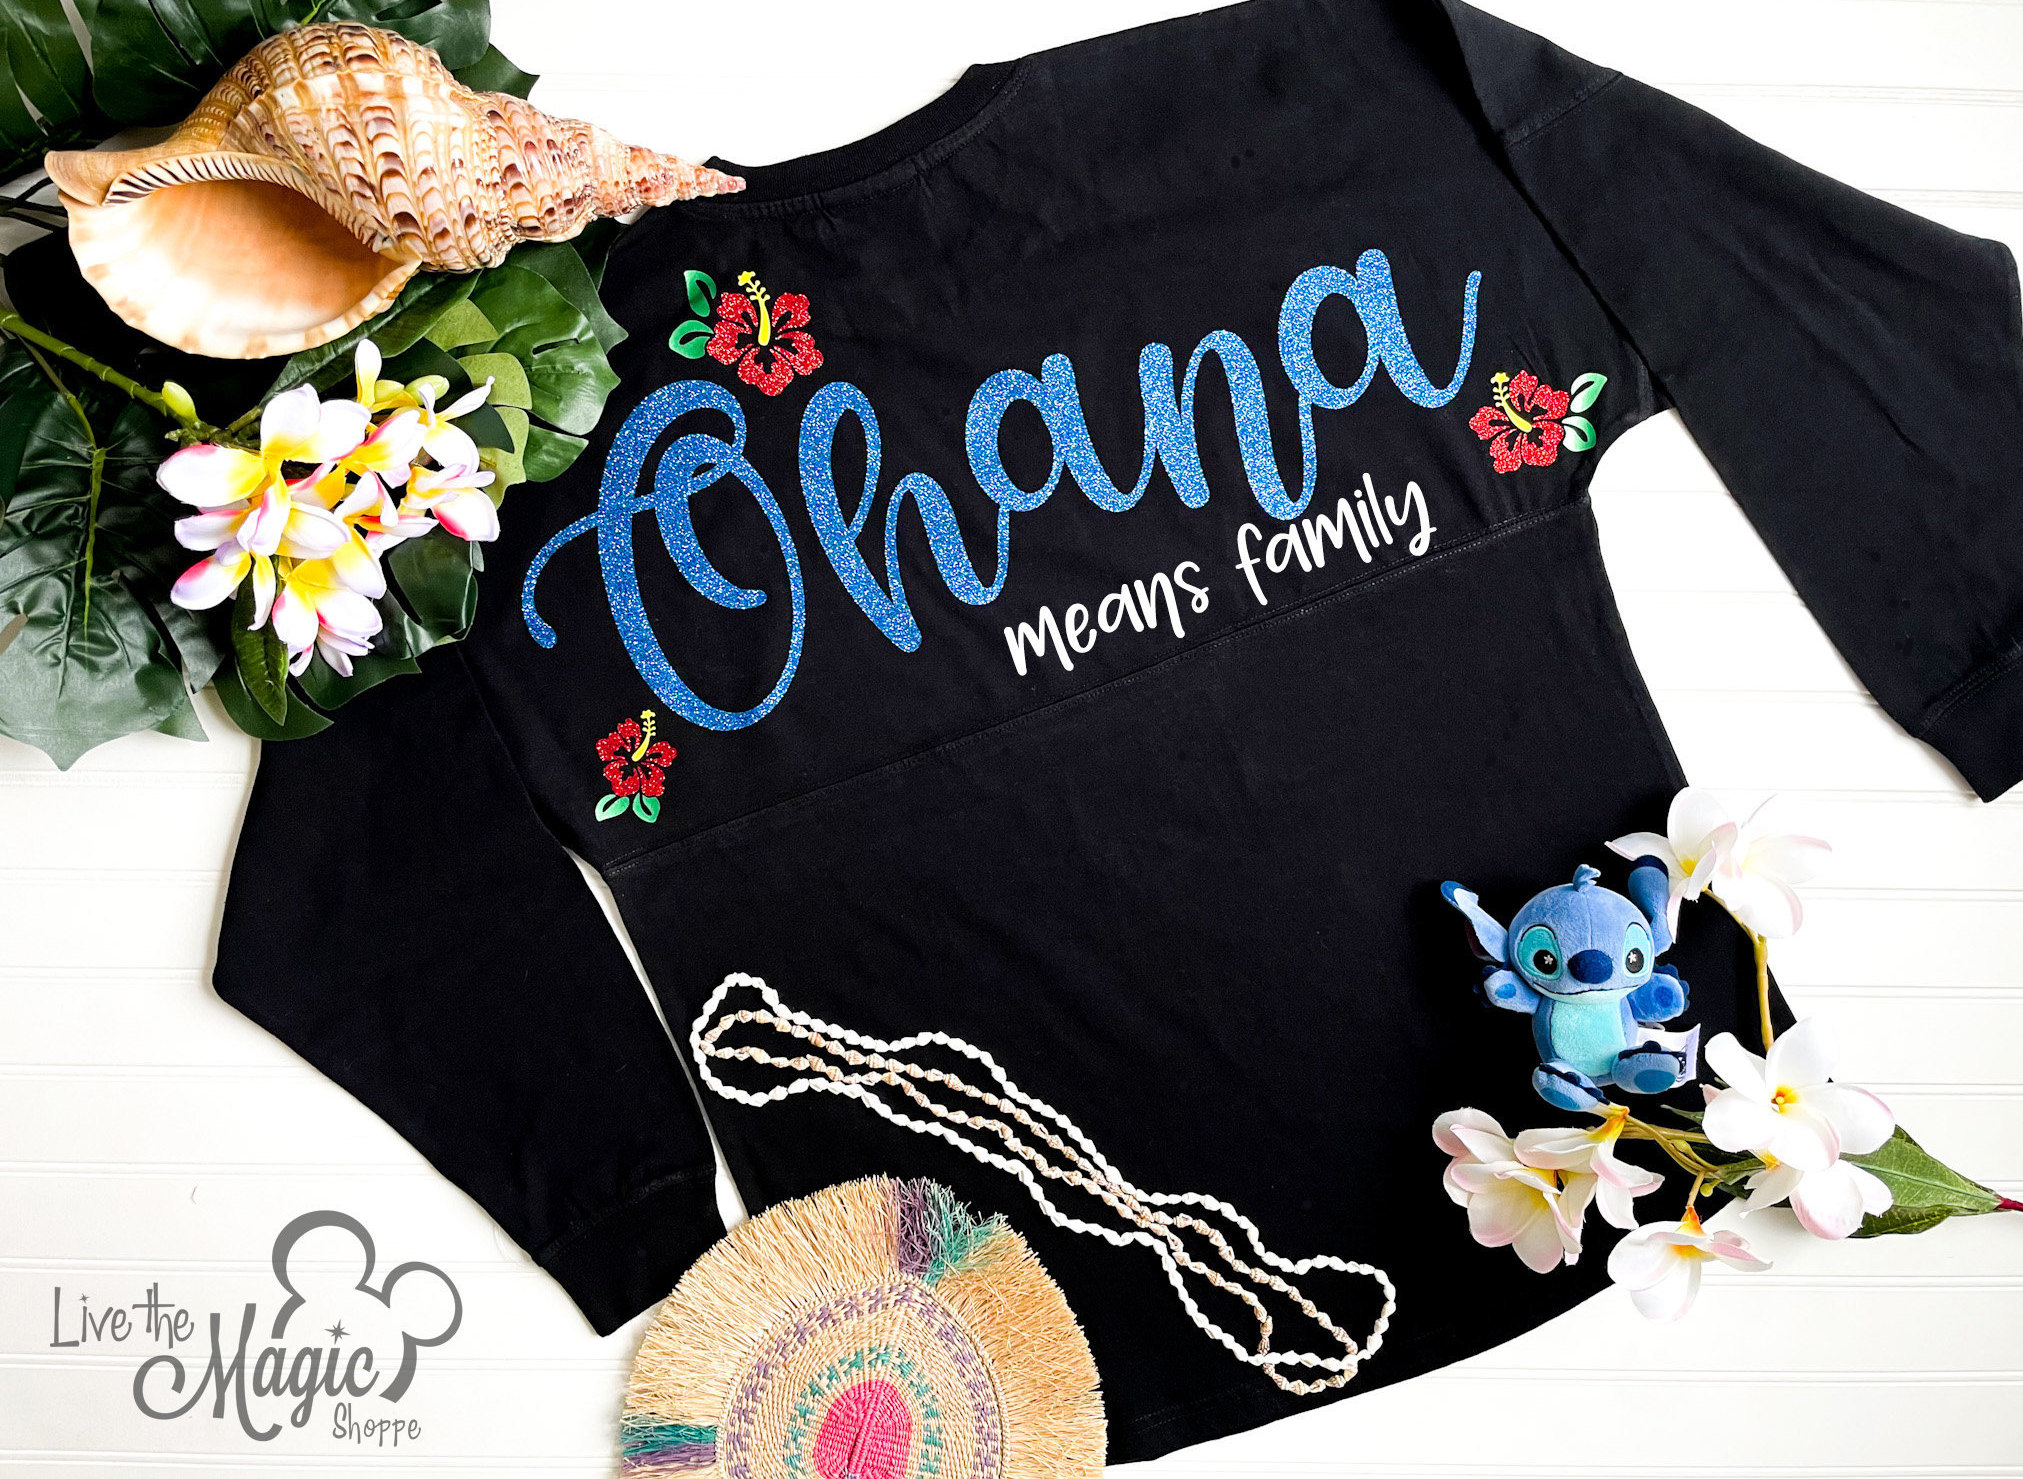 Get Game-Ready with Braves Lilo & Stitch Jersey - Gray - Scesy